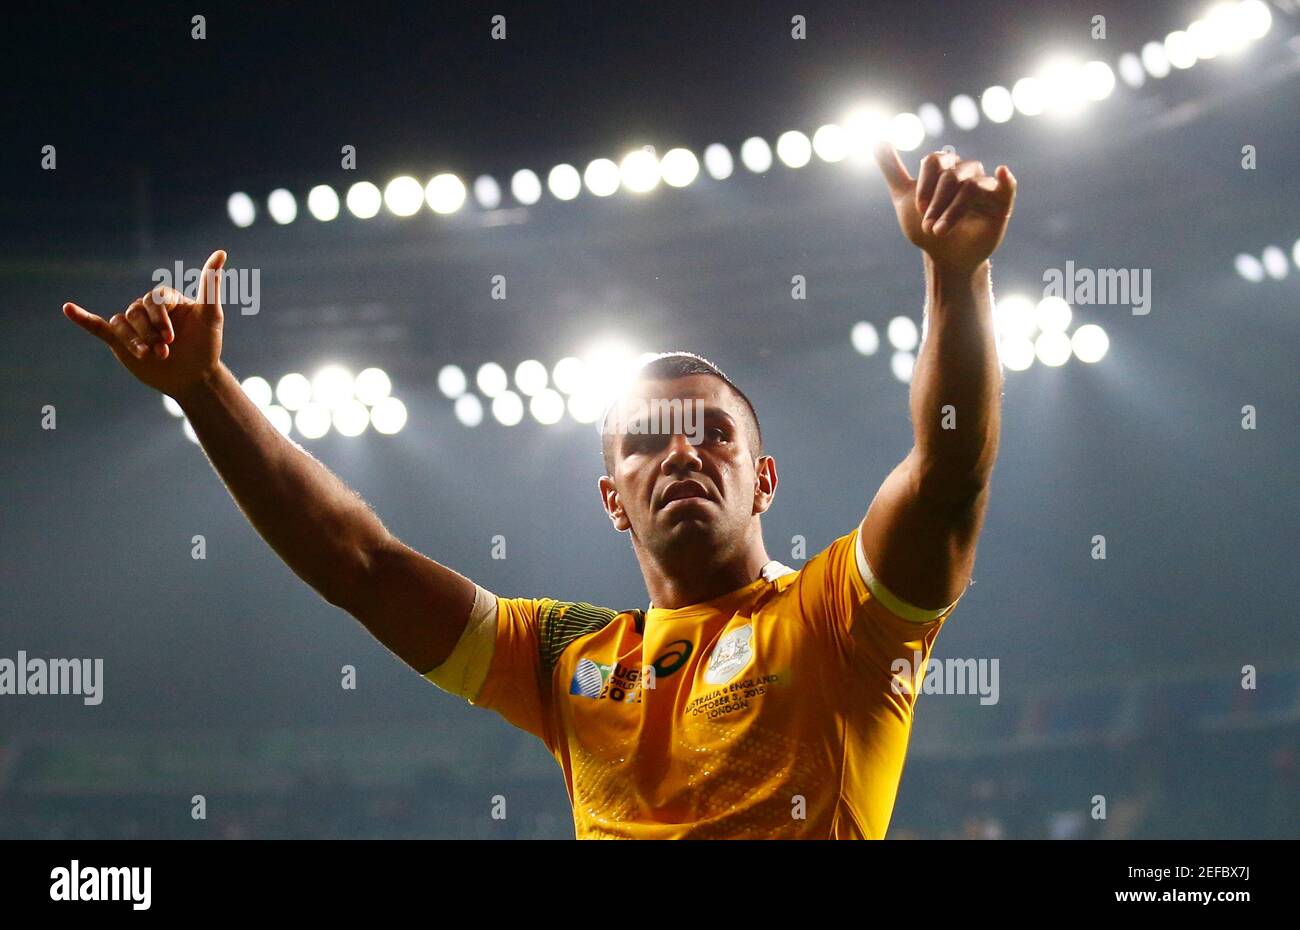 Rugby Union - England v Australia - IRB Rugby World Cup 2015 Pool A - Twickenham Stadium, London, England - 3/10/15  Australia's Kurtley Beale celebrates at the end of the game  Reuters / Andrew Winning  Livepic Stock Photo